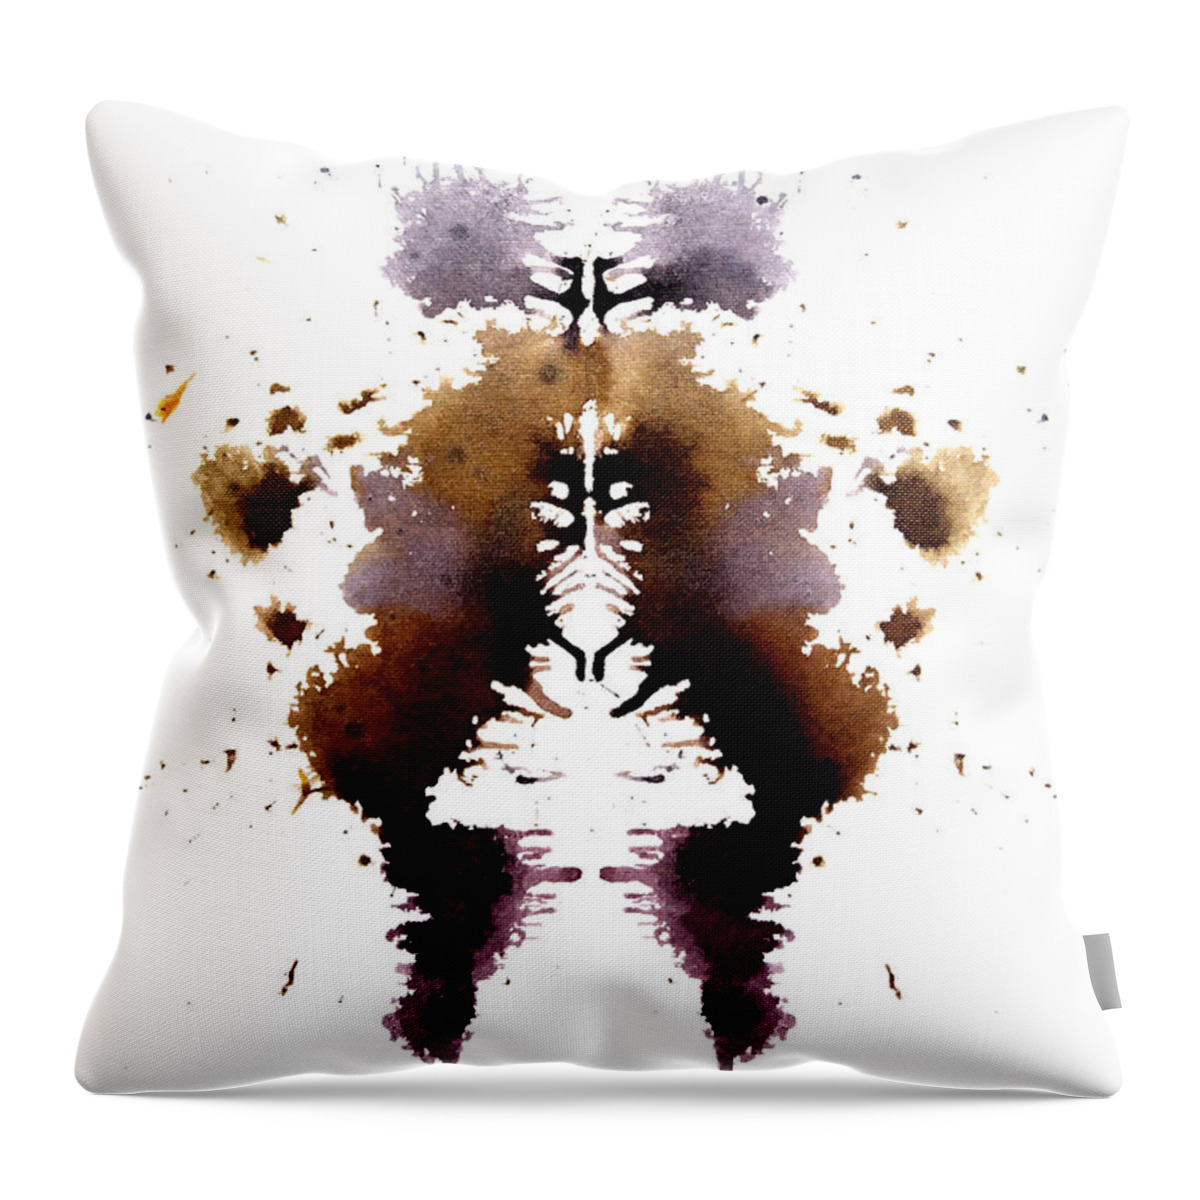 Abstract Throw Pillow featuring the painting Human and Higher Self by Stephenie Zagorski